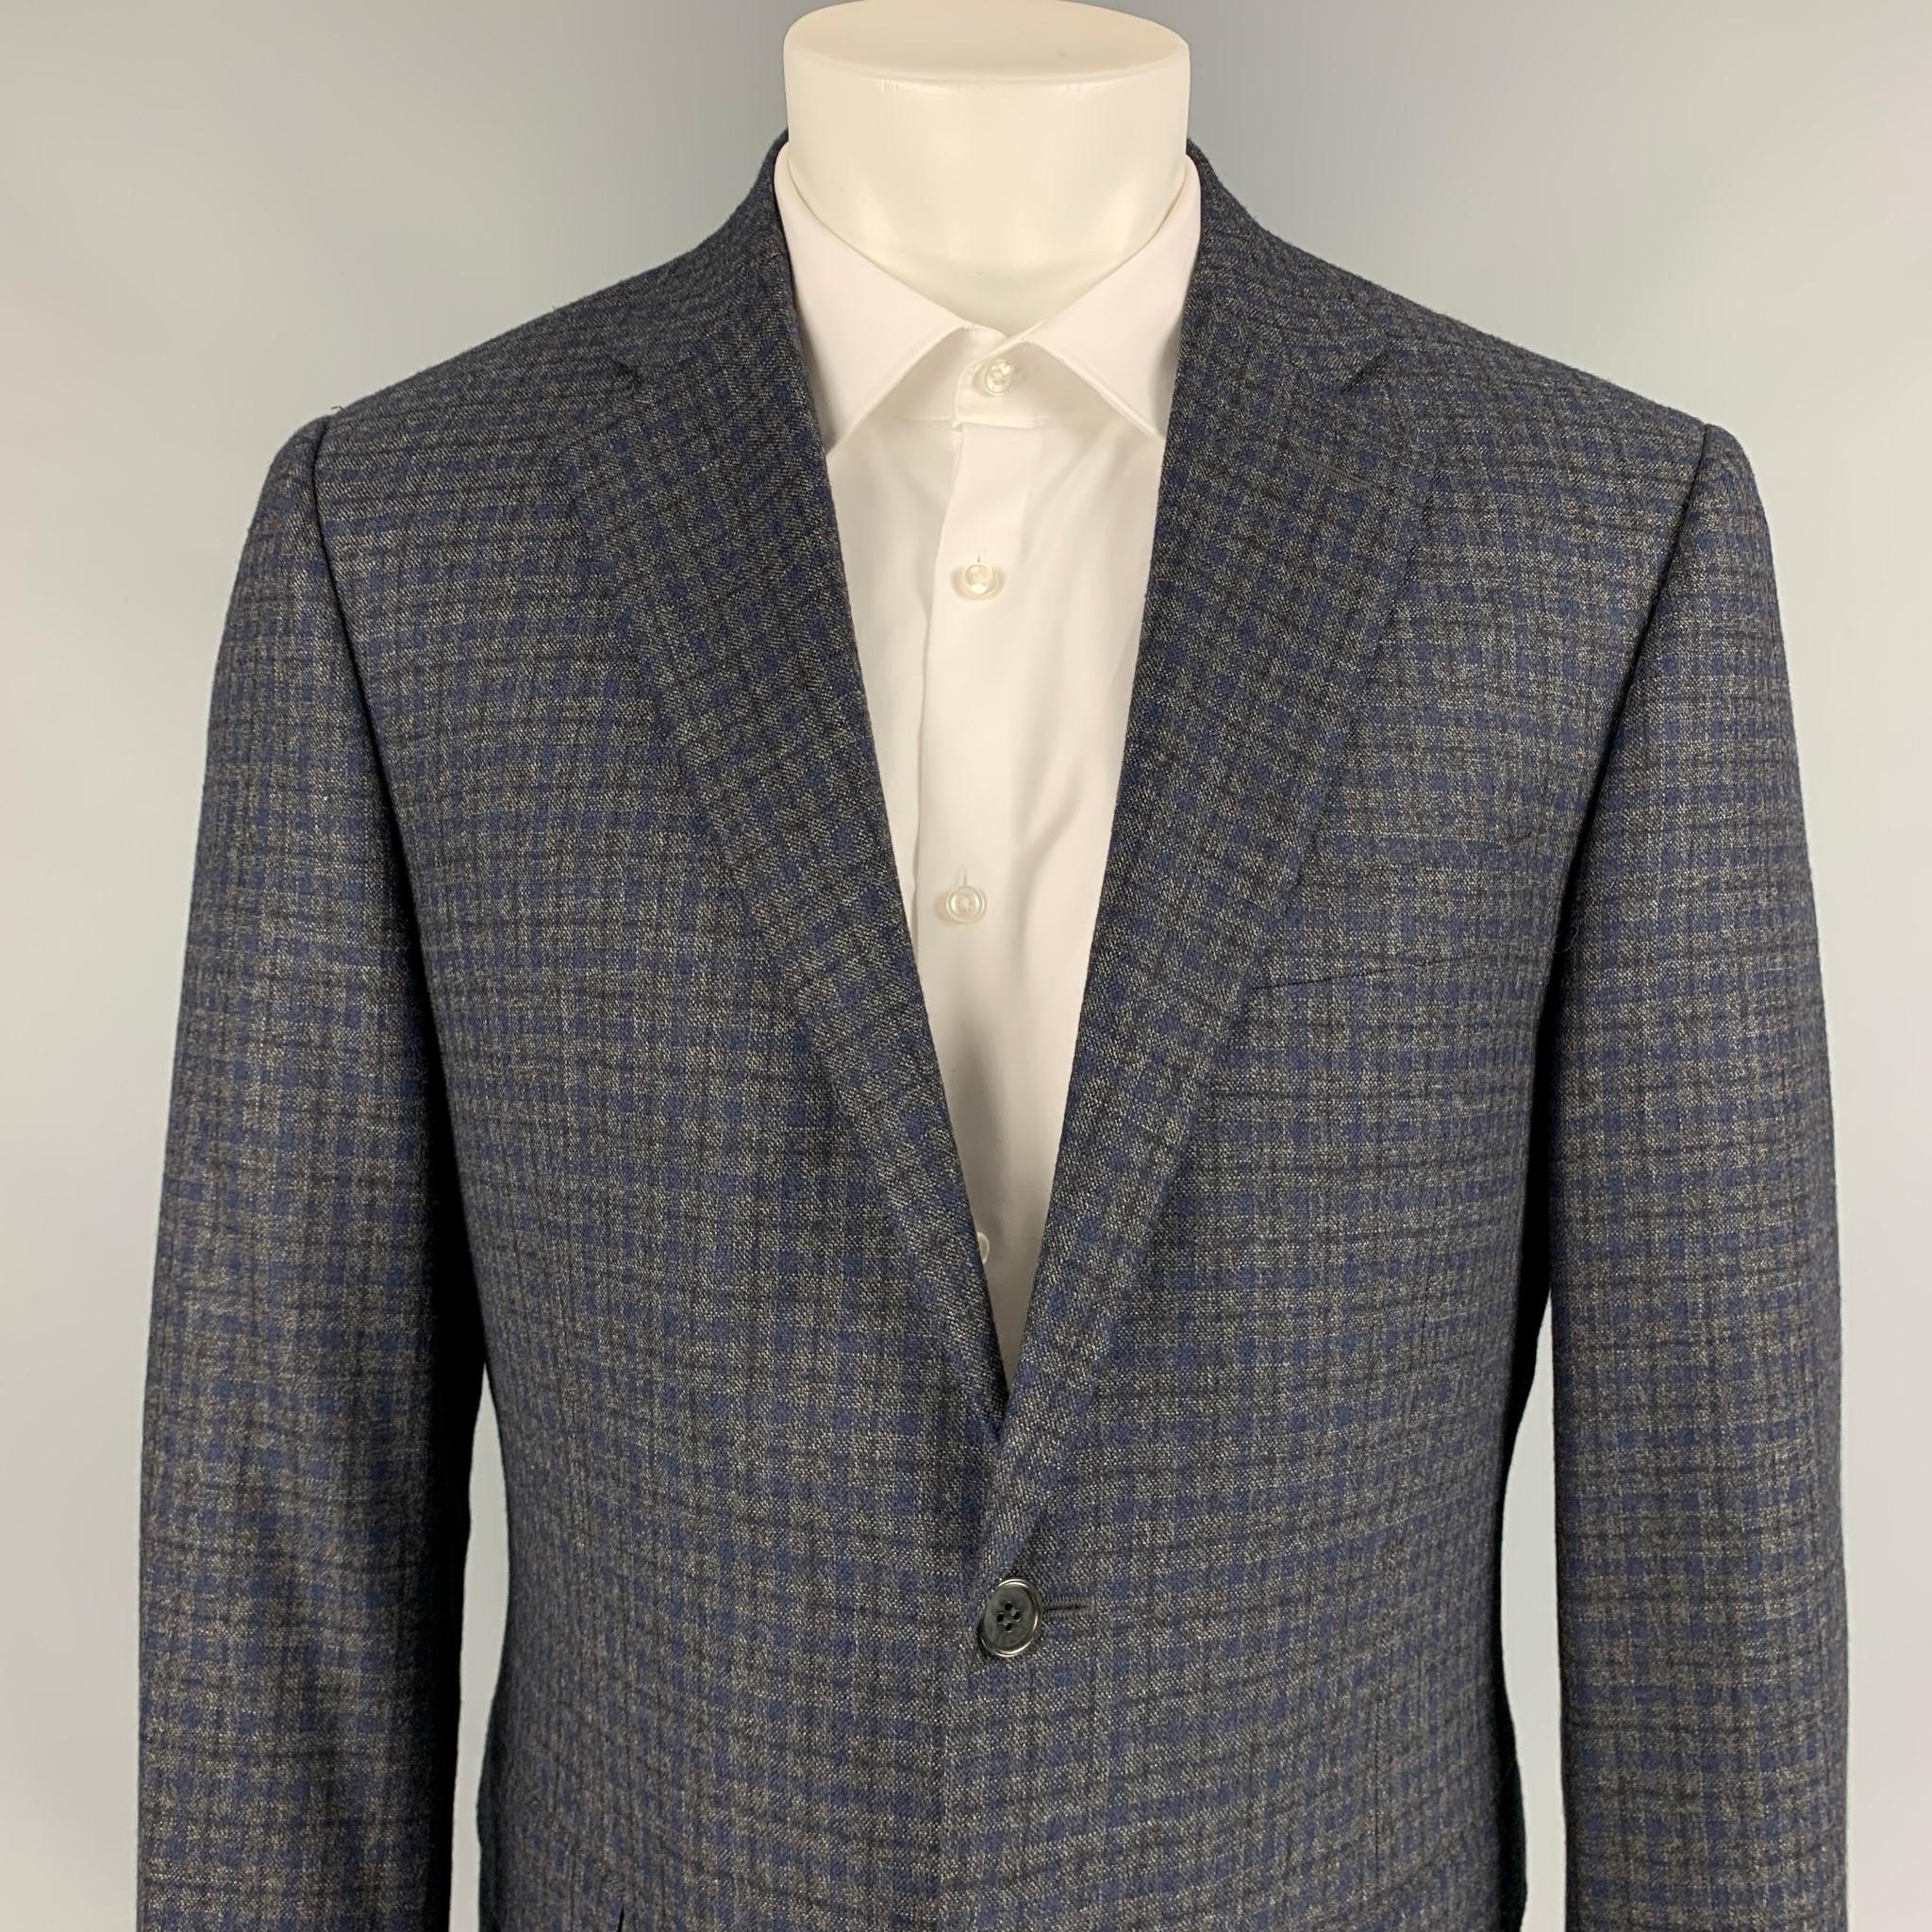 CANALI sport coat comes in a grey & navy plaid wool with a full liner featuring a notch lapel, flap pockets, double back vent, and a double button closure. Made in Italy. 

Very Good Pre-Owned Condition.
Marked: 50 R

Measurements:

Shoulder: 19